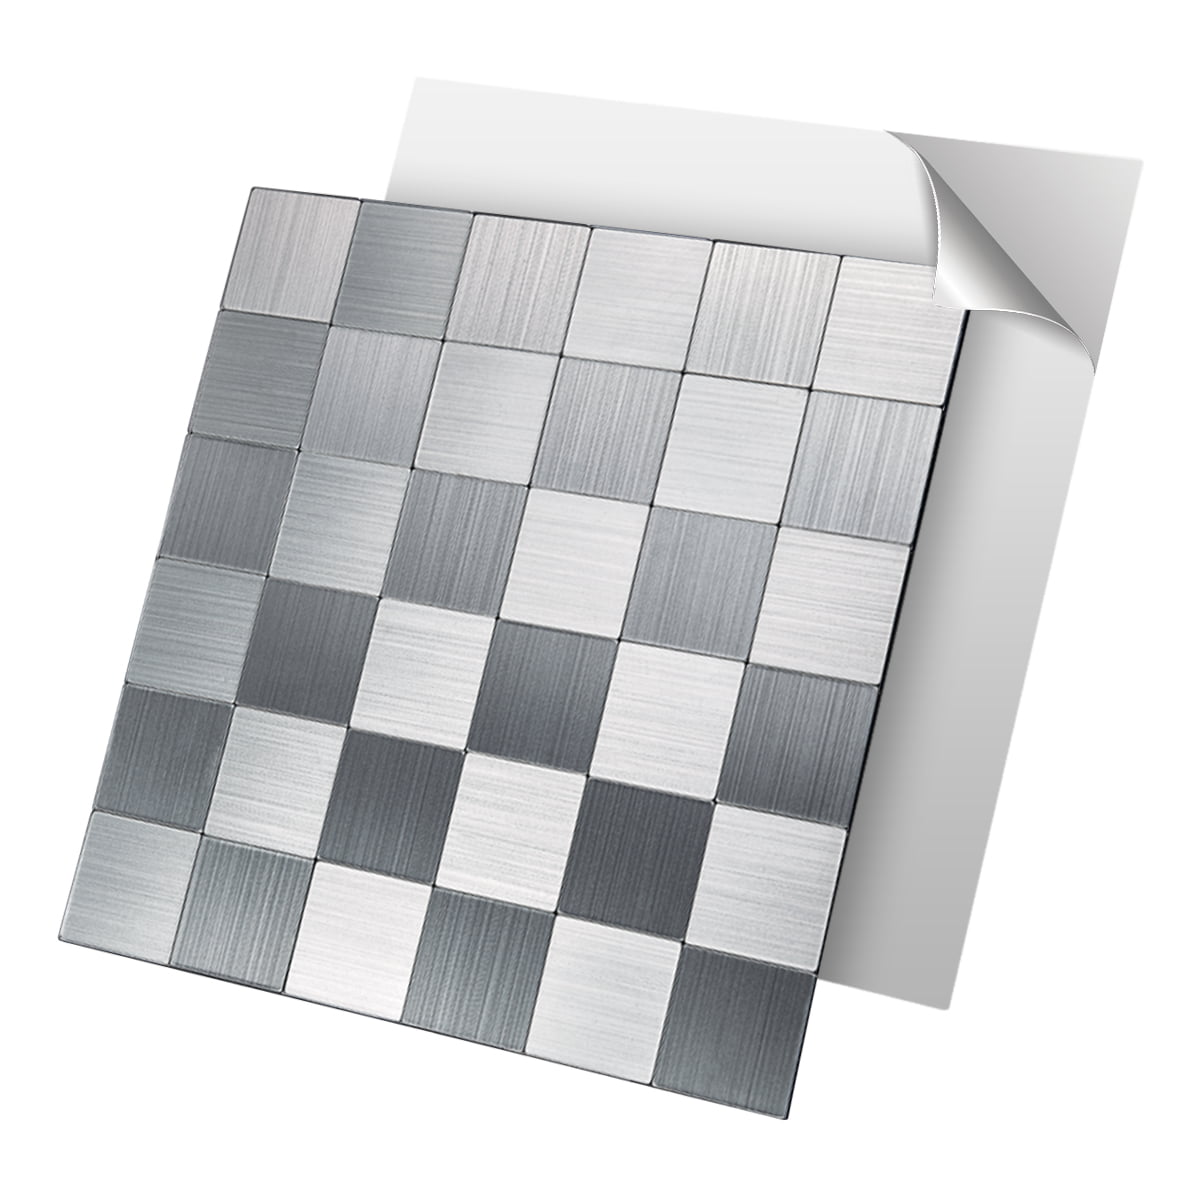 Pack of 10 Tiles 12x12 Brushed Stainless Steel in Square Art3d Peel and Stick Metal Backsplash Tile 